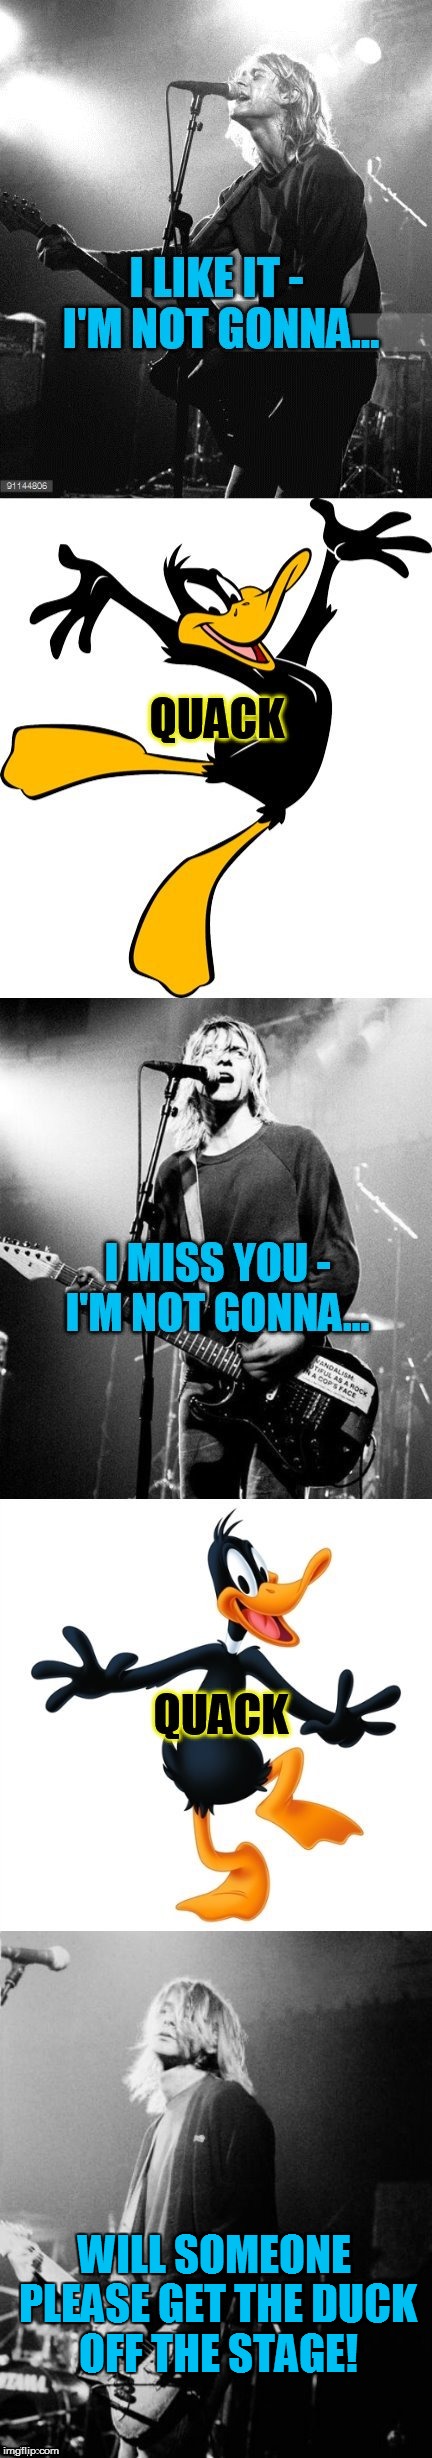 Kurt Cobain trying to sing Lithium! | WILL SOMEONE PLEASE GET THE DUCK OFF THE STAGE! | image tagged in funny meme,kurt cobain,nirvana,lithium,daffy duck,song lyrics | made w/ Imgflip meme maker